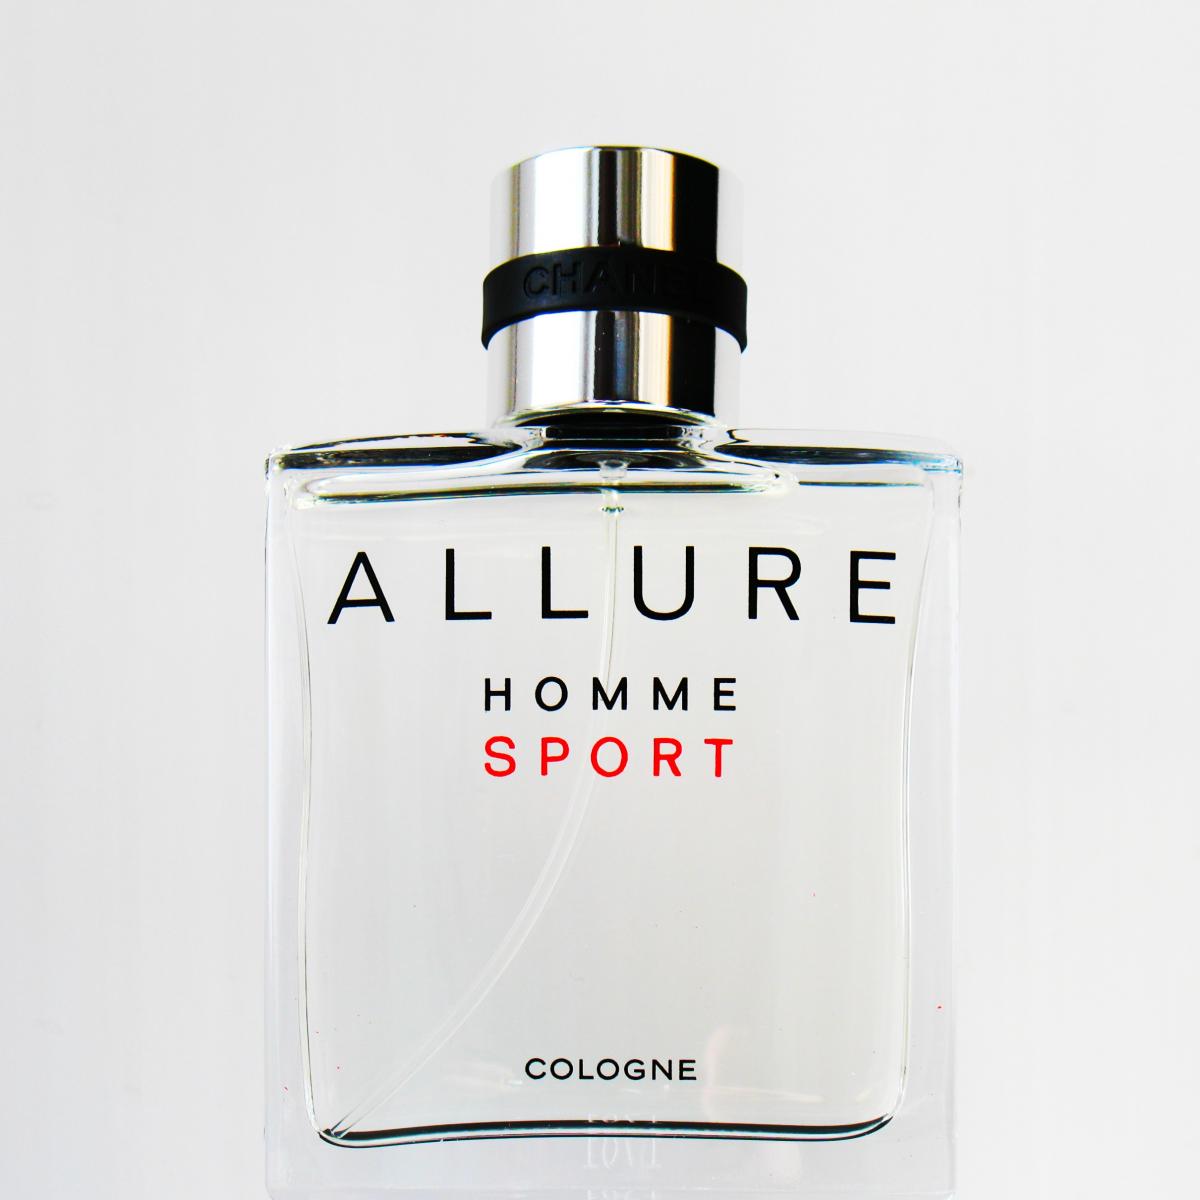 Chanel homme sport cologne. Chanel Allure homme Sport Cologne. Chanel Allure homme Sport Cologne 3*20. Chanel Allure Sport Cologne 50ml.